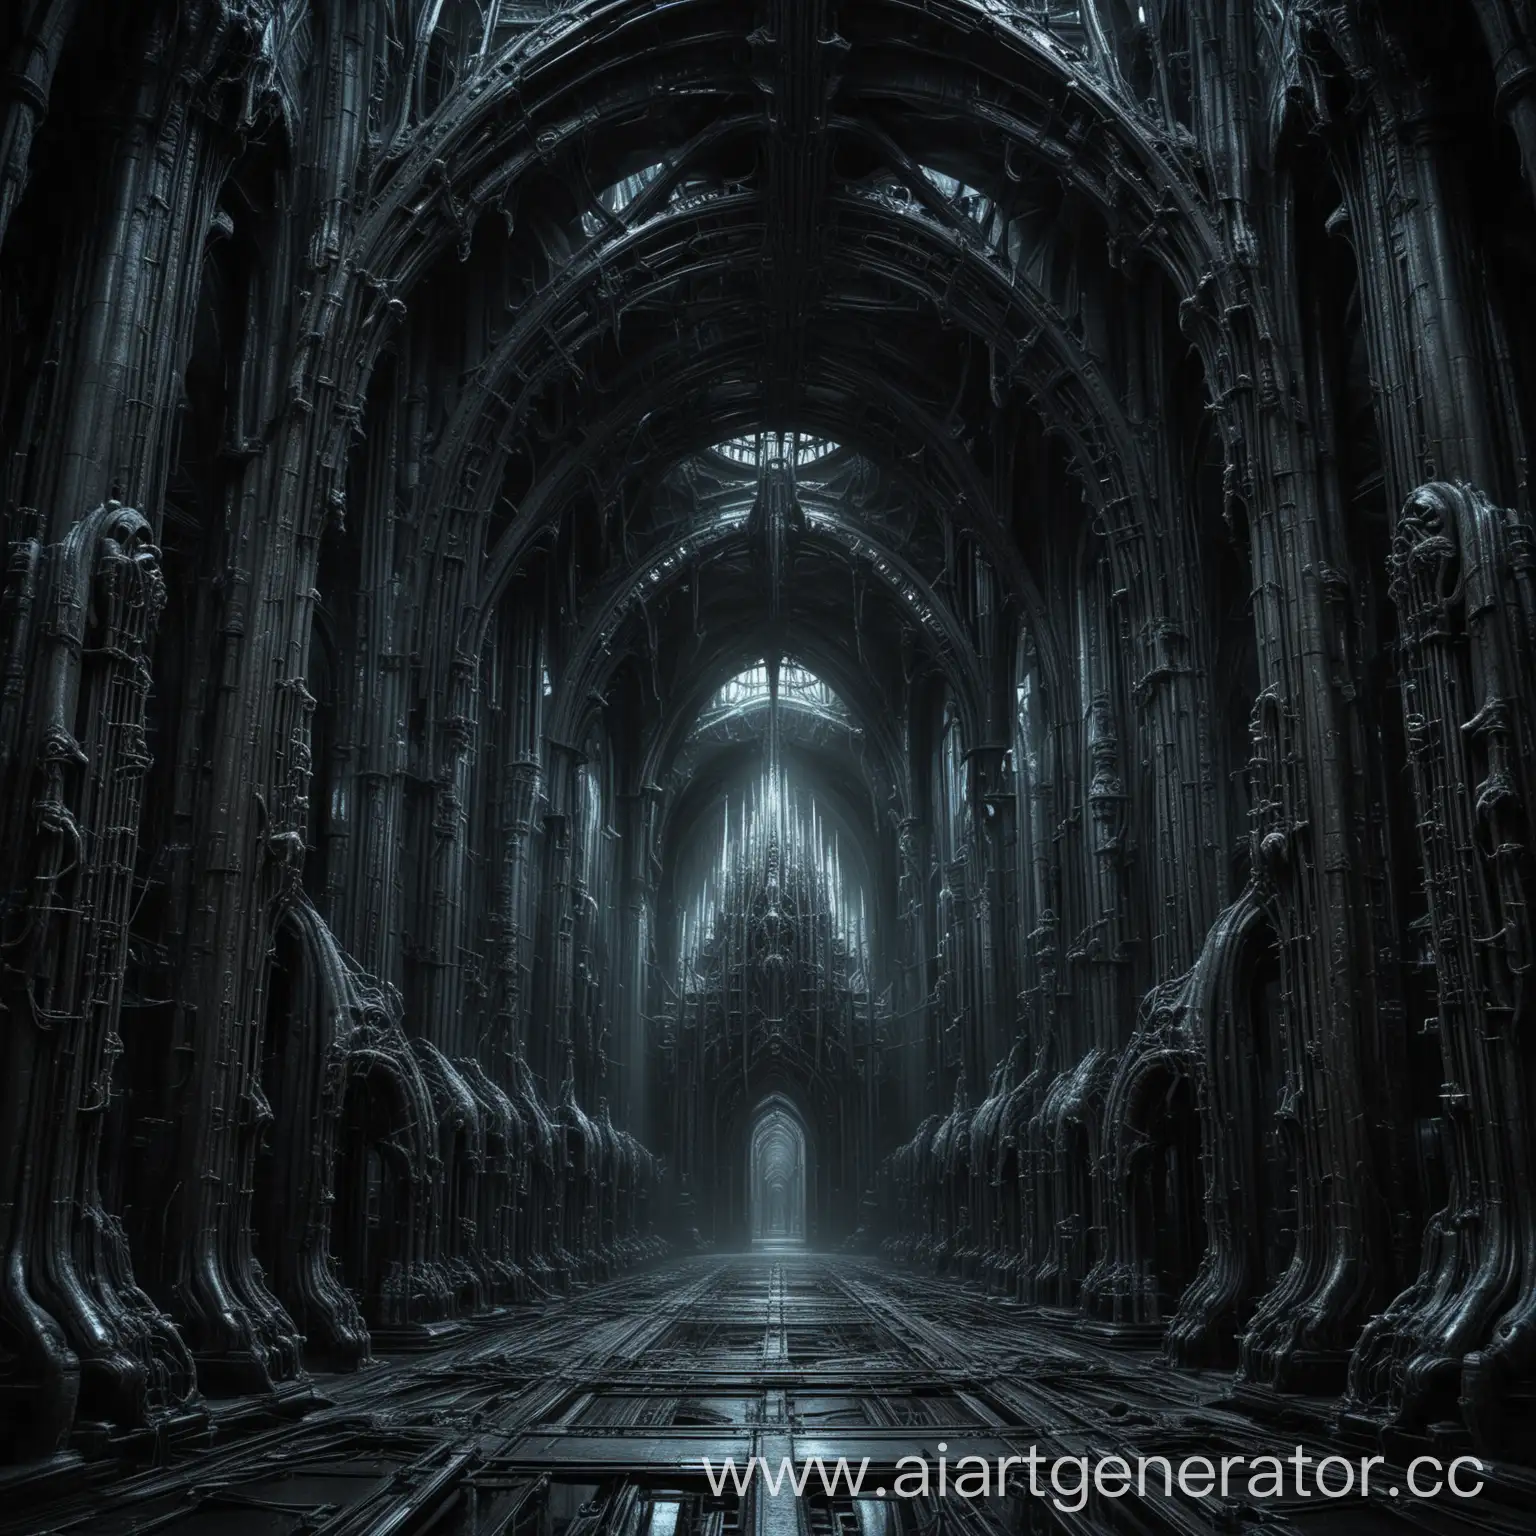 Infernal-Gothic-Cathedral-in-Giger-Style-Biomechanical-Architecture-with-Neon-Illumination